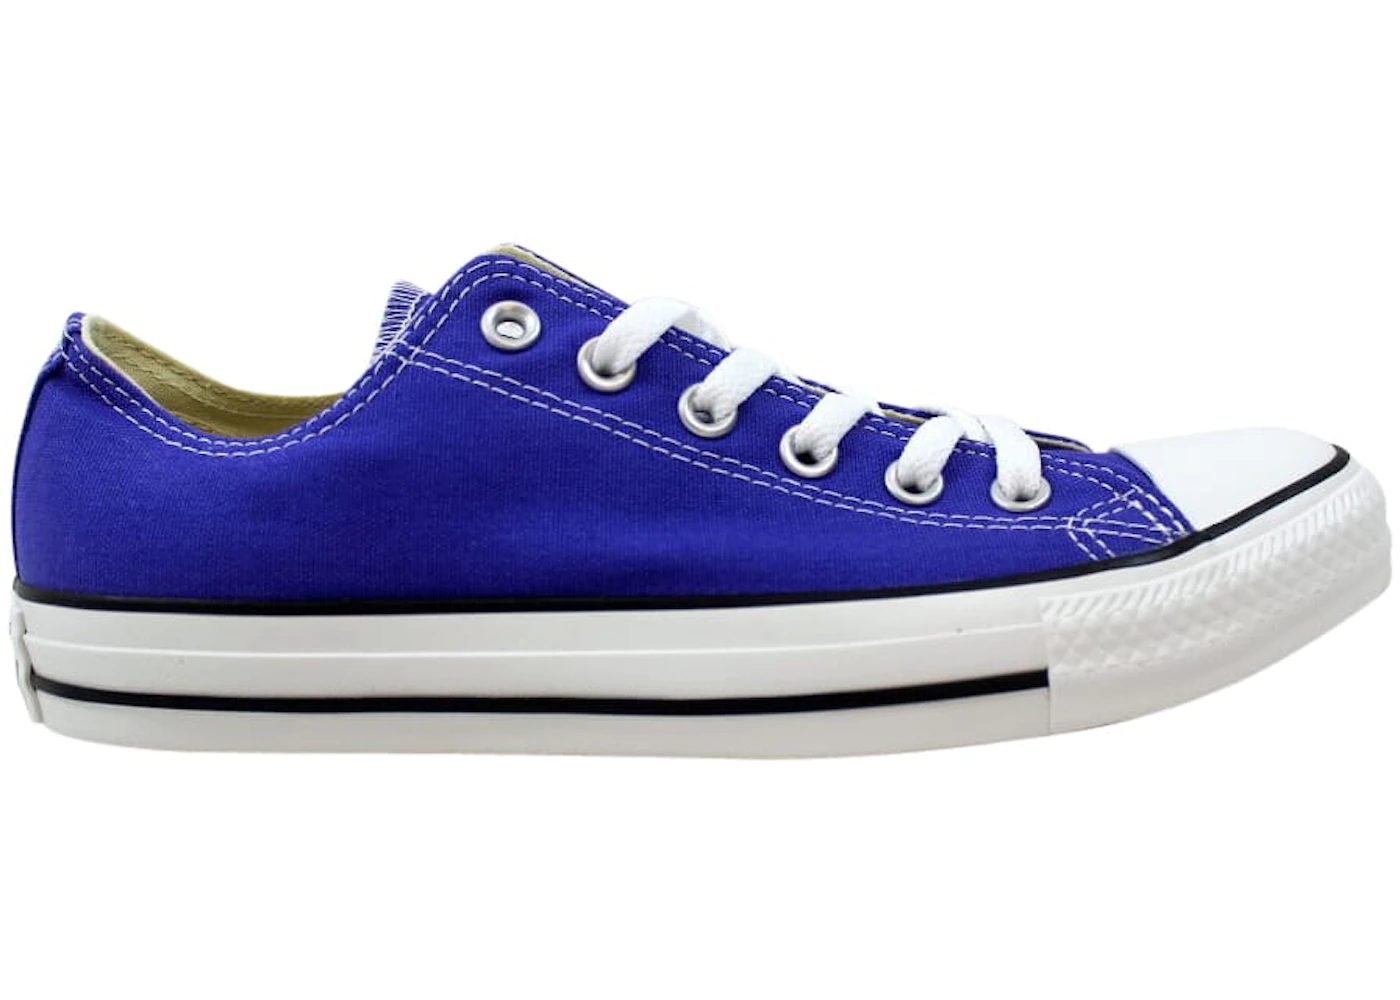 Converse Chuck Taylor Ox Periwinkle - 147140F - US